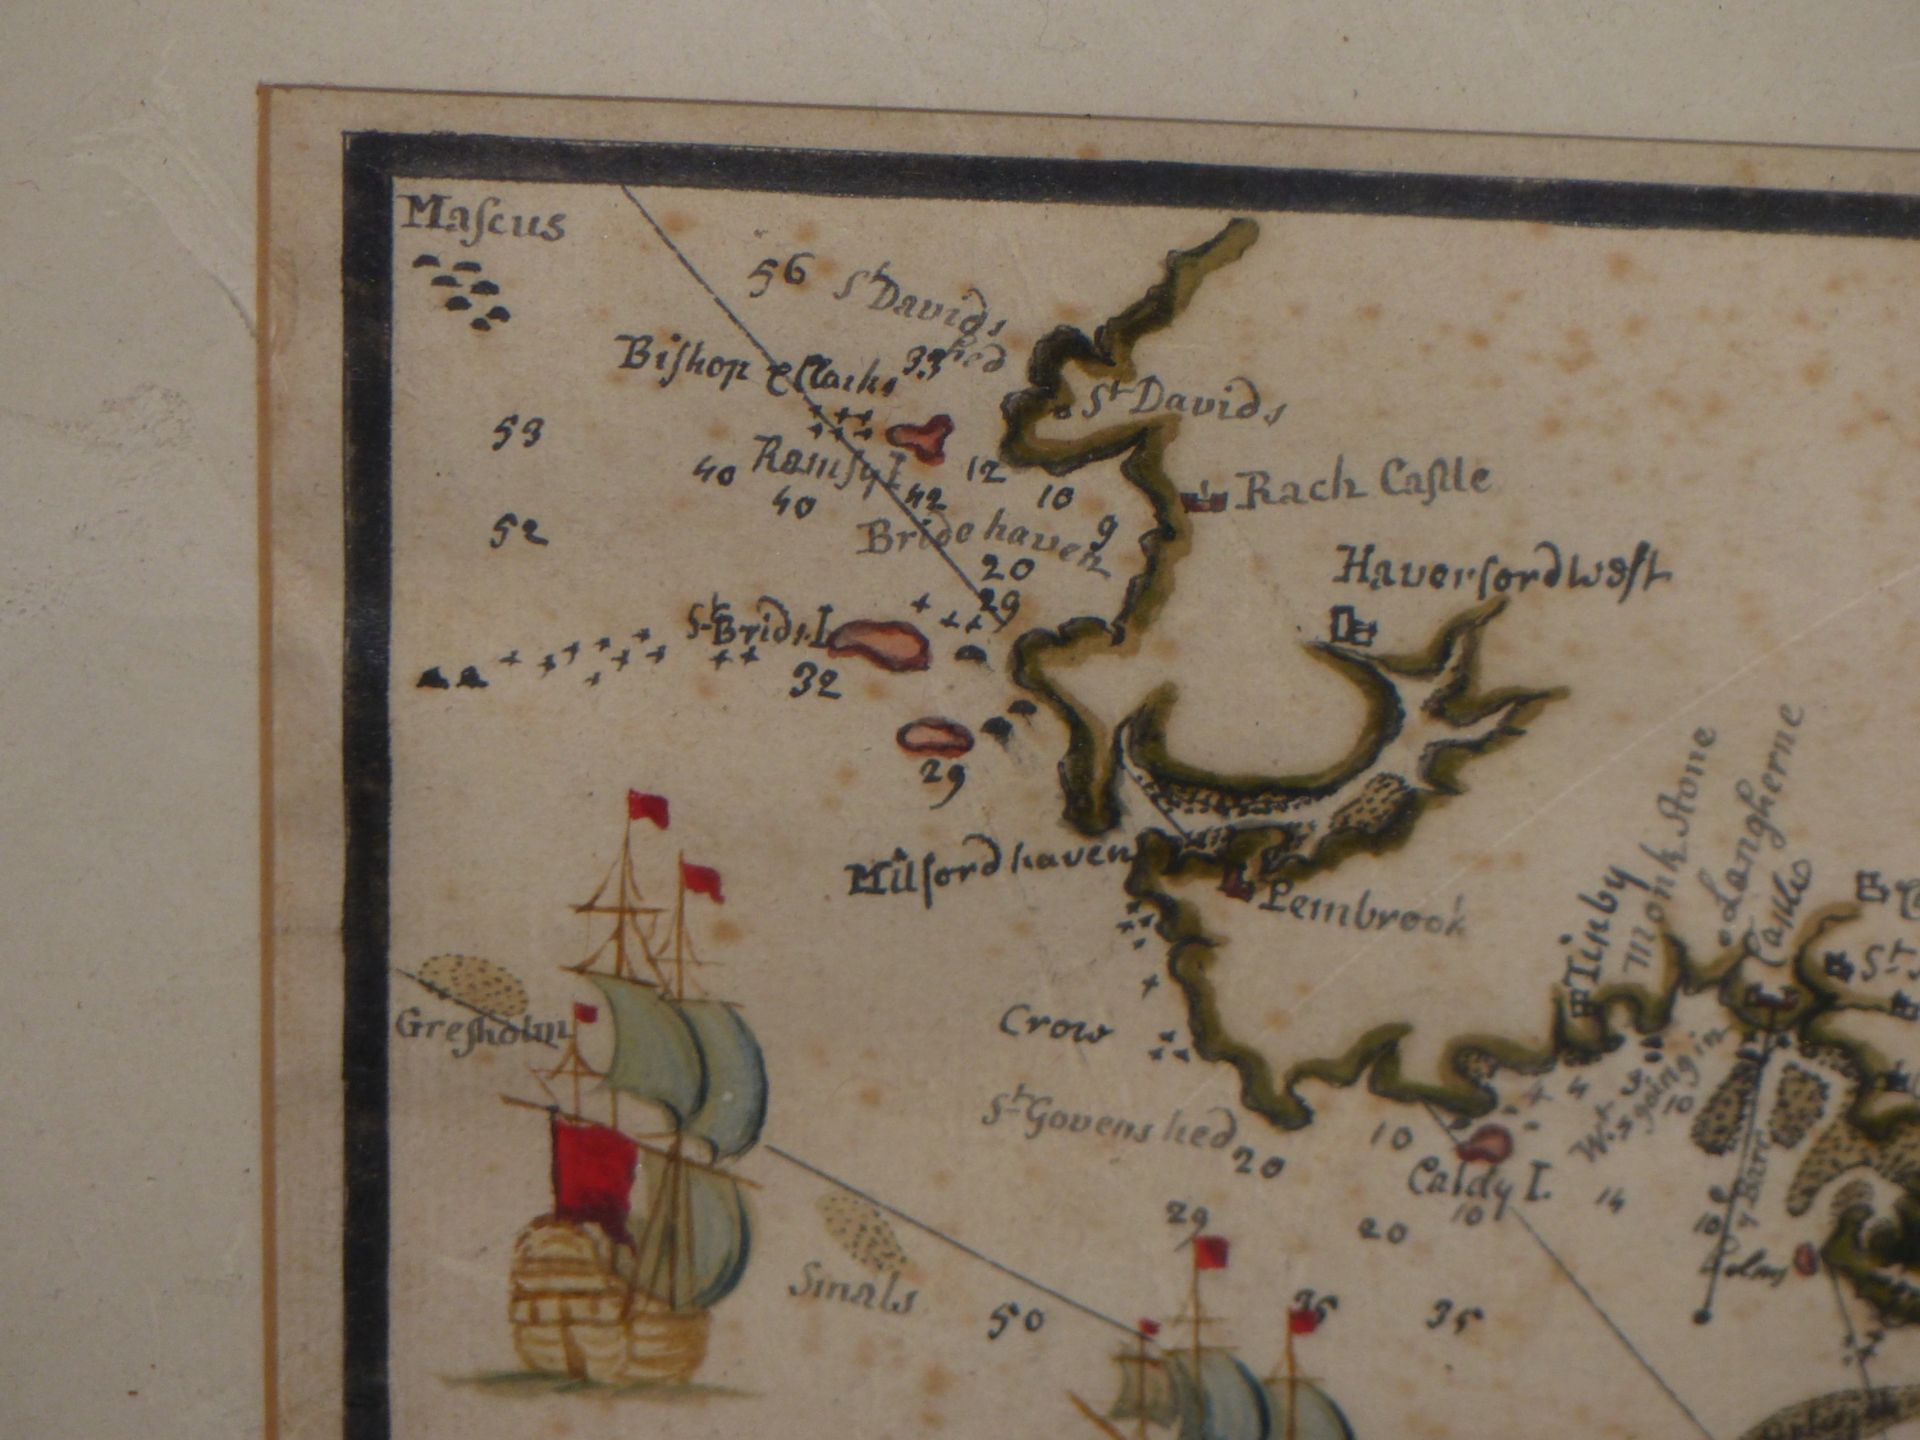 G. WOOD (CARTOGRAPHER) 18TH CENTURY ENGLISH. A DRAUGHT(SIC) OF THE BRISTOL CHANNEL EXACTLY - Image 6 of 9